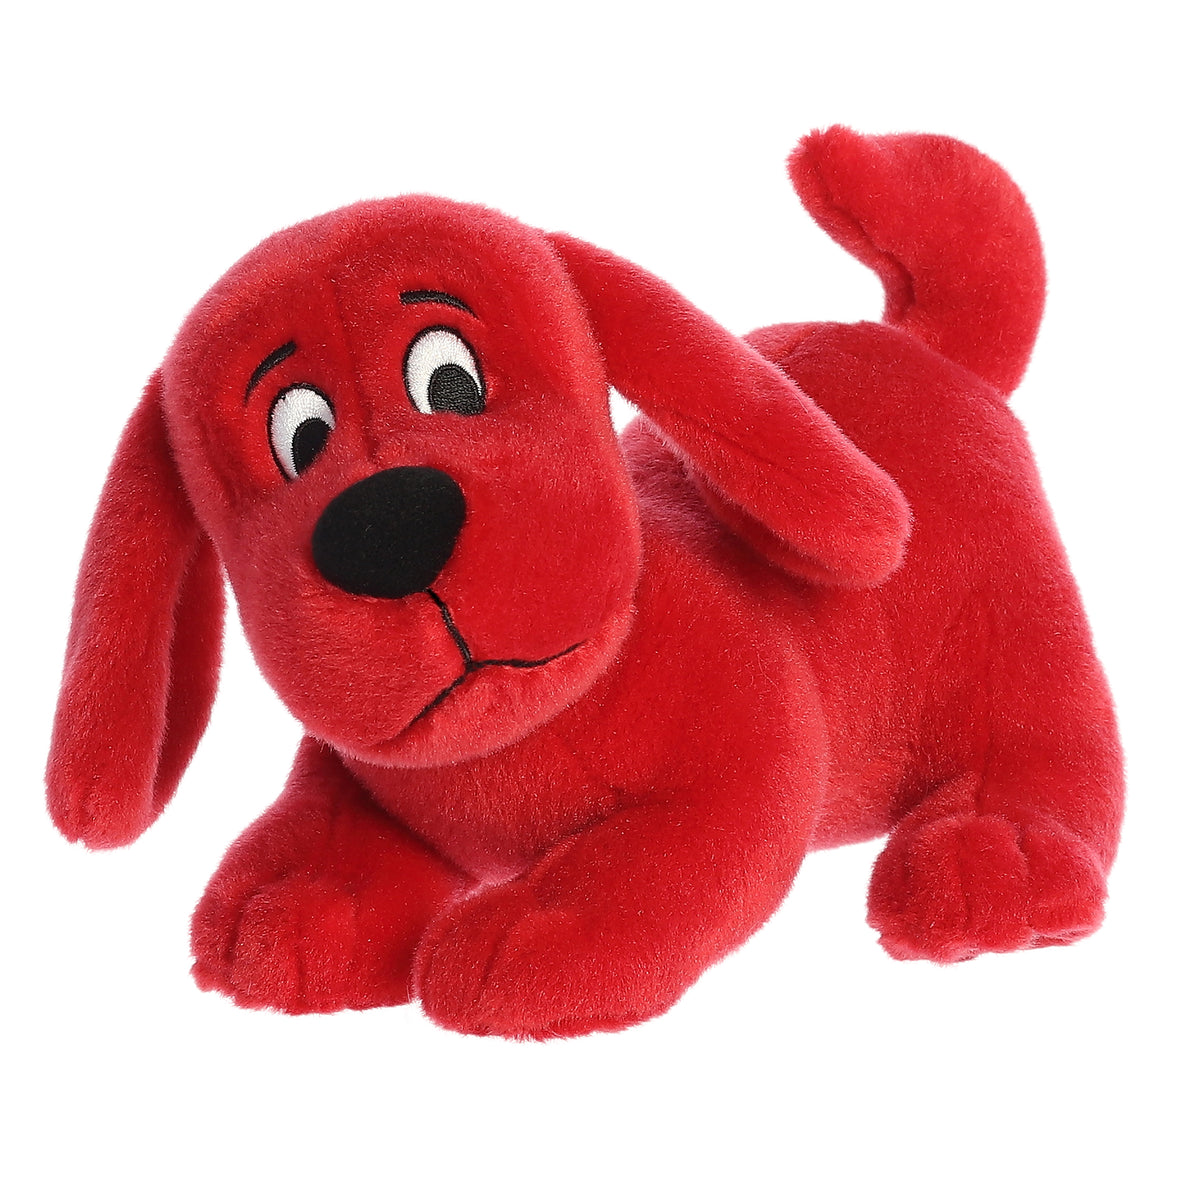 Clifford the big red dog plush by Aurora, sporting his iconic red hue and black studded collar, in a ready to play stance.